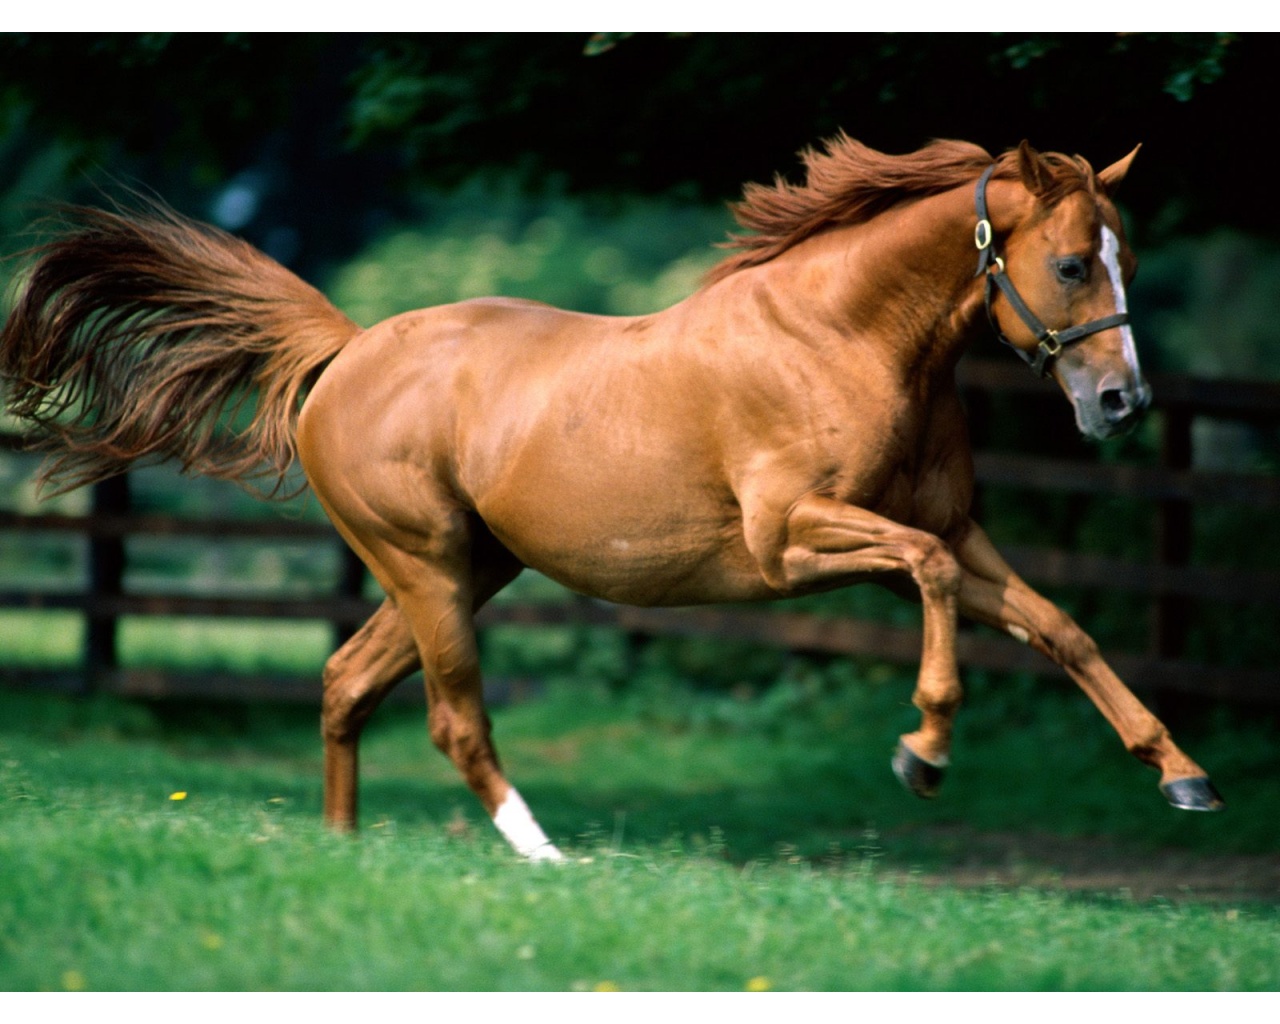 ... Brown Horse Running Desktop Wallpapers. These desktop wallpapers are high definition and available in wide range of sizes and resolutions.